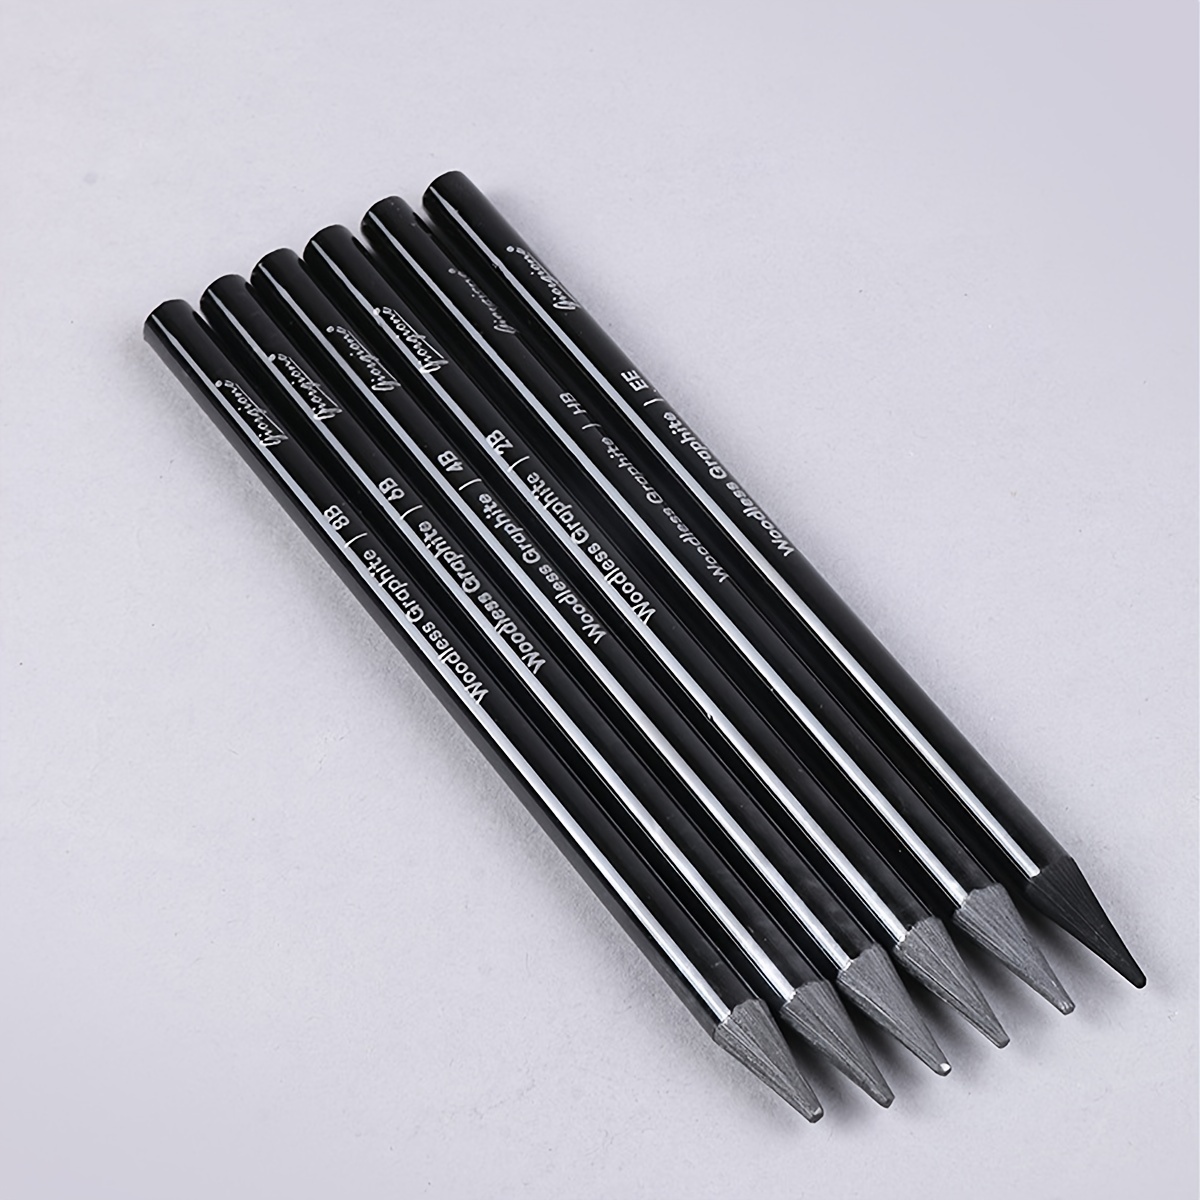 6 Pack Woodless Black Graphite Pencils Set Assorted HB 2B 4B 6B 8B EE Black  Soft Sketch Pencils Drawing Set Art Painting Supplies Pencils for Drawing